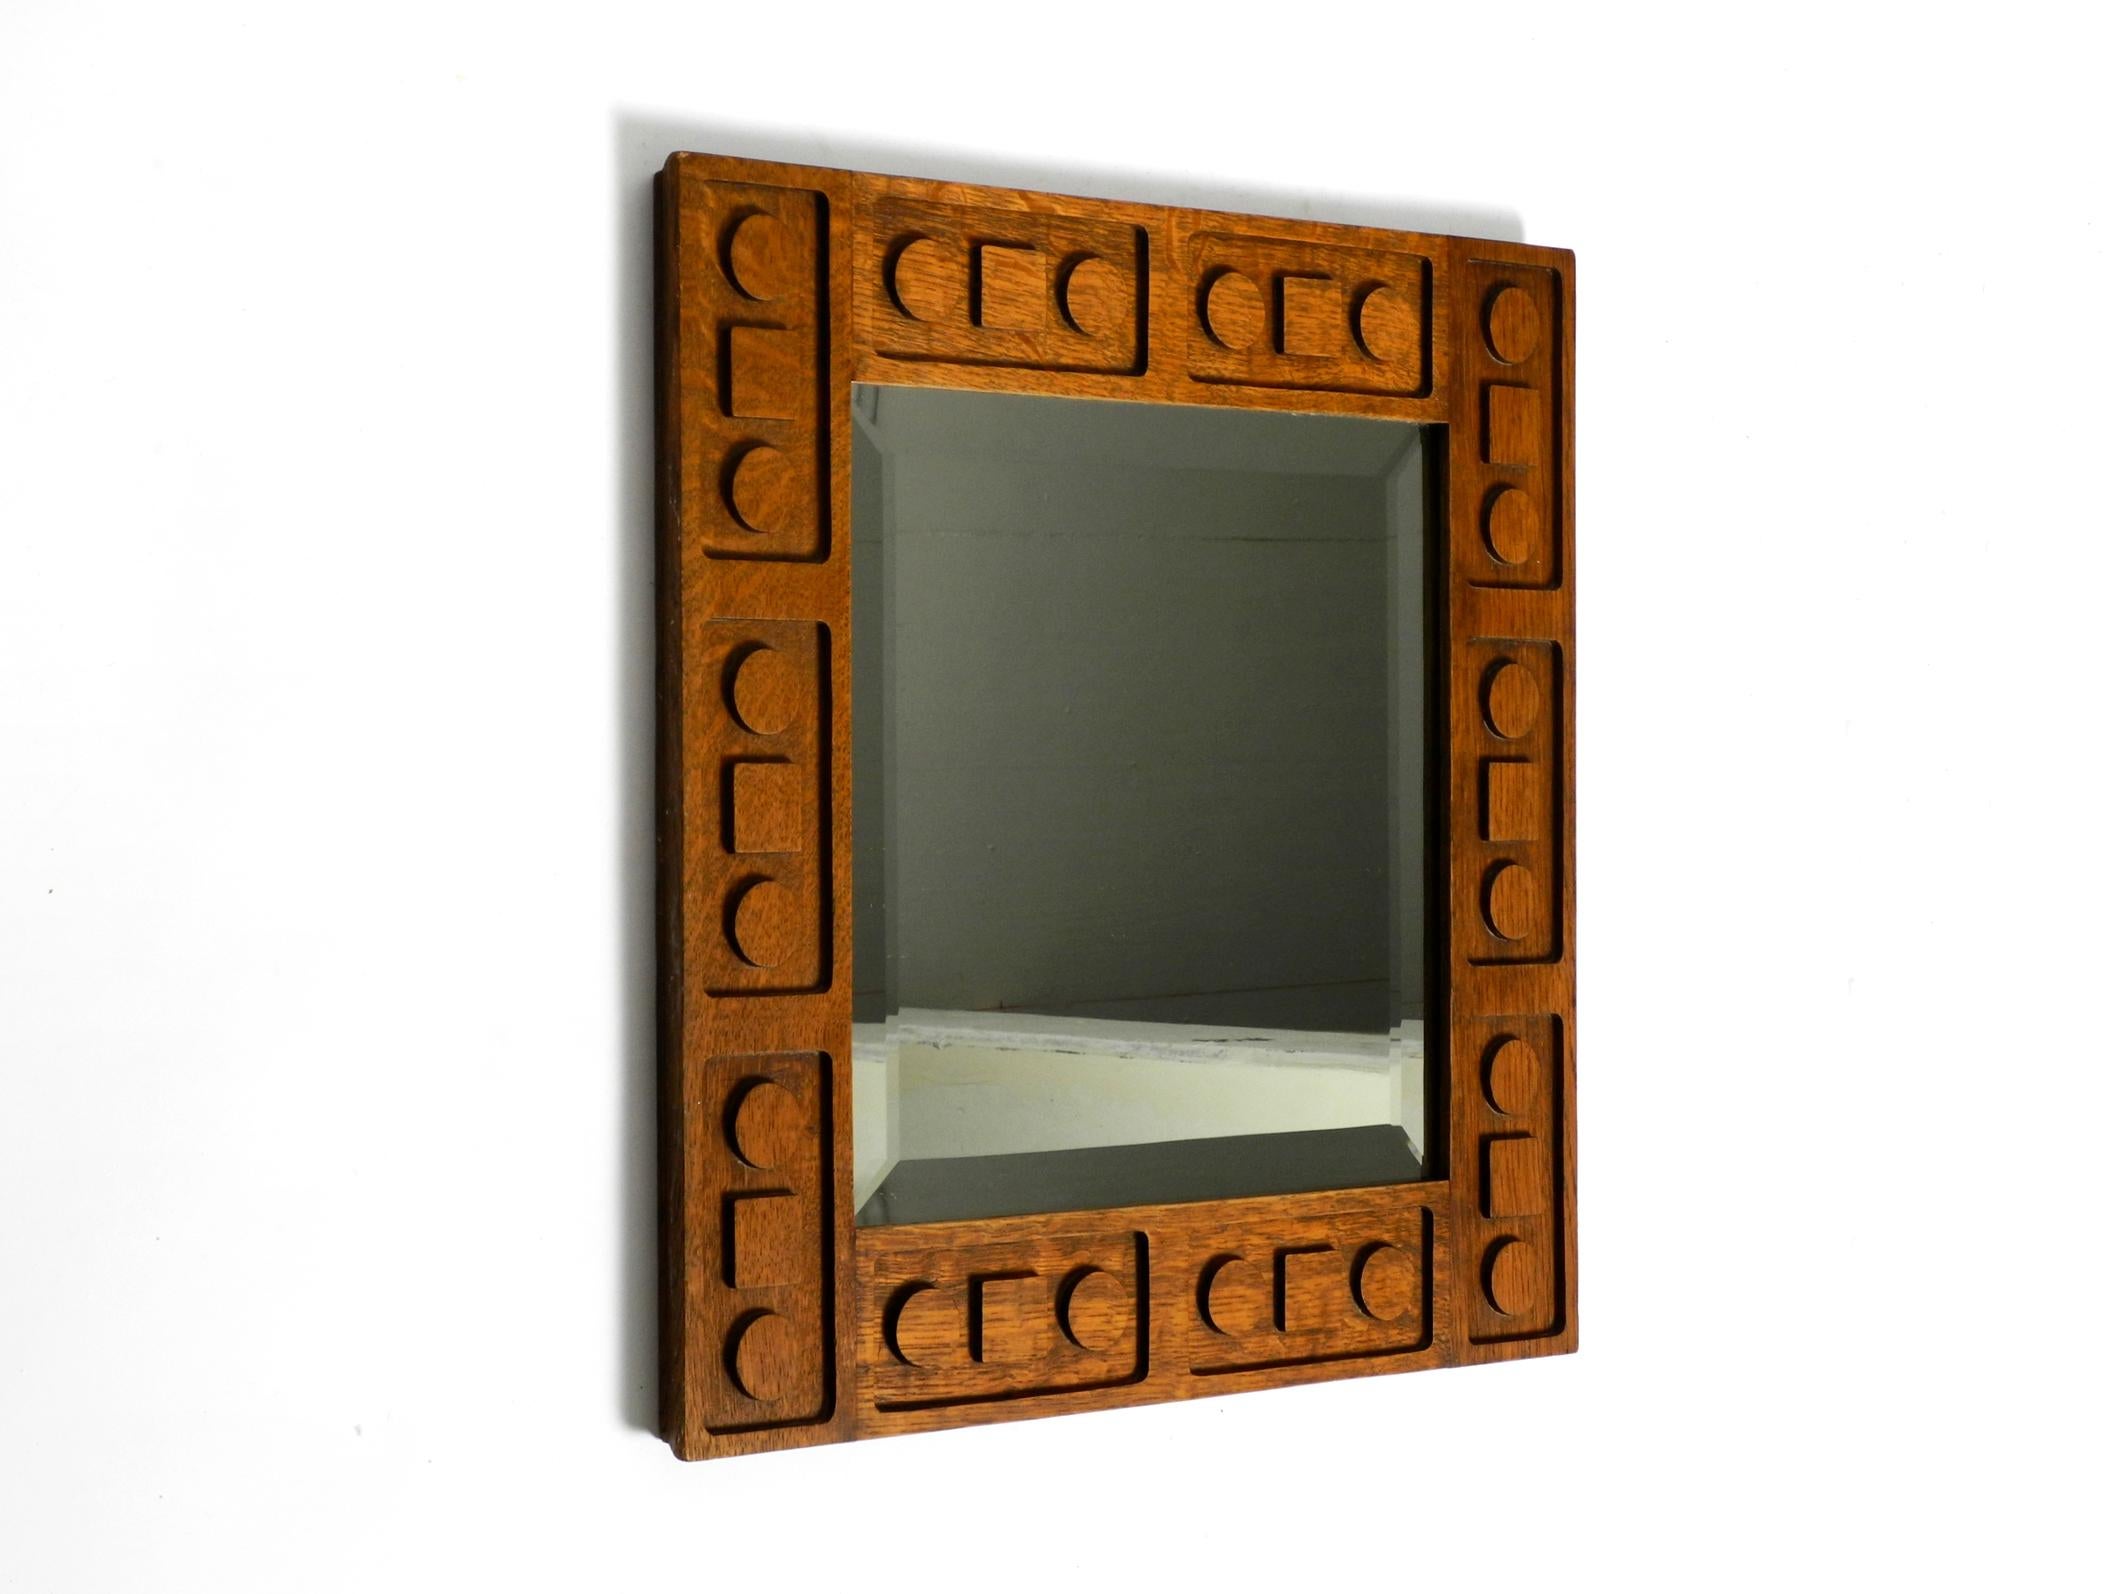 Beautiful artful 1930s wall mirror made of dark oak wood.
Great Art Deco design from the 30s. Made in Germany.
Very elaborately manufactured with the graphic motifs on the frame.
Very good vintage condition with no damage and a fantastic light